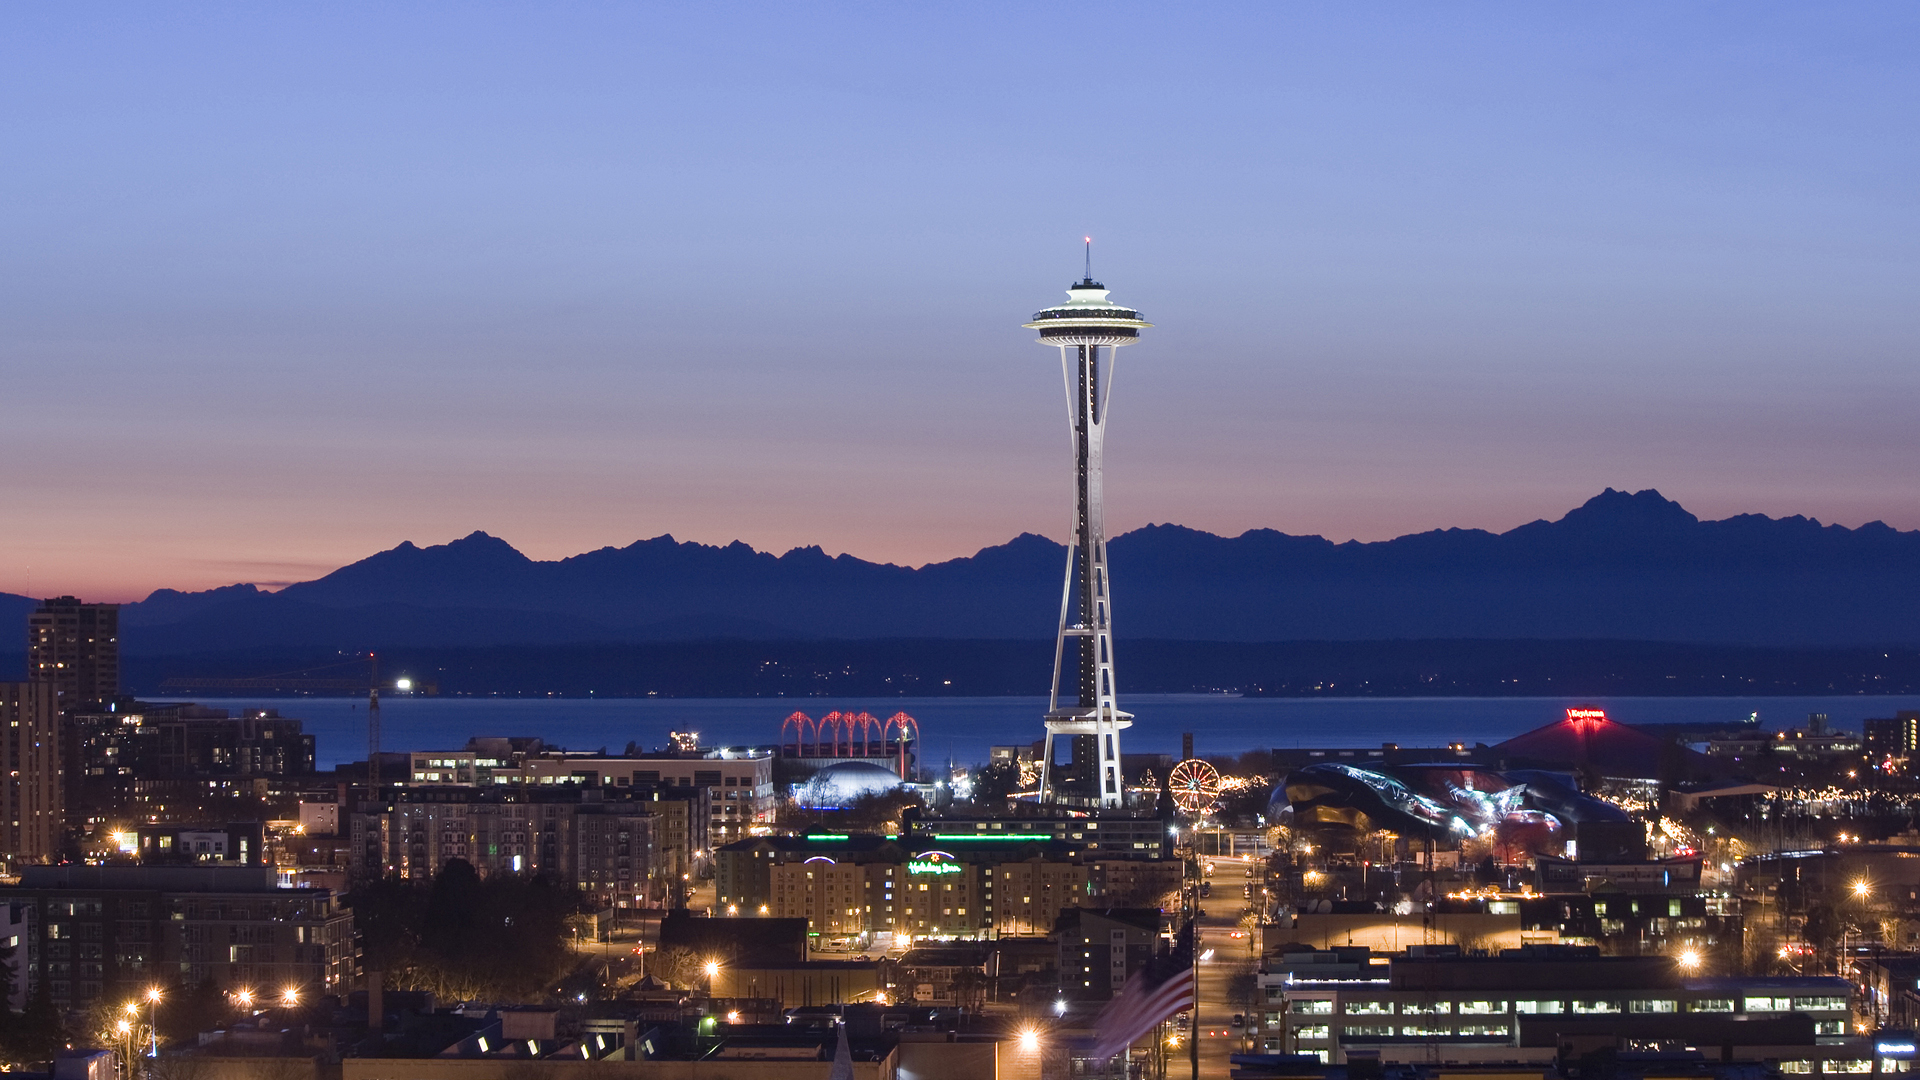 Space Needle Seattle 1080p   HQ Free Wallpapers download 100 high